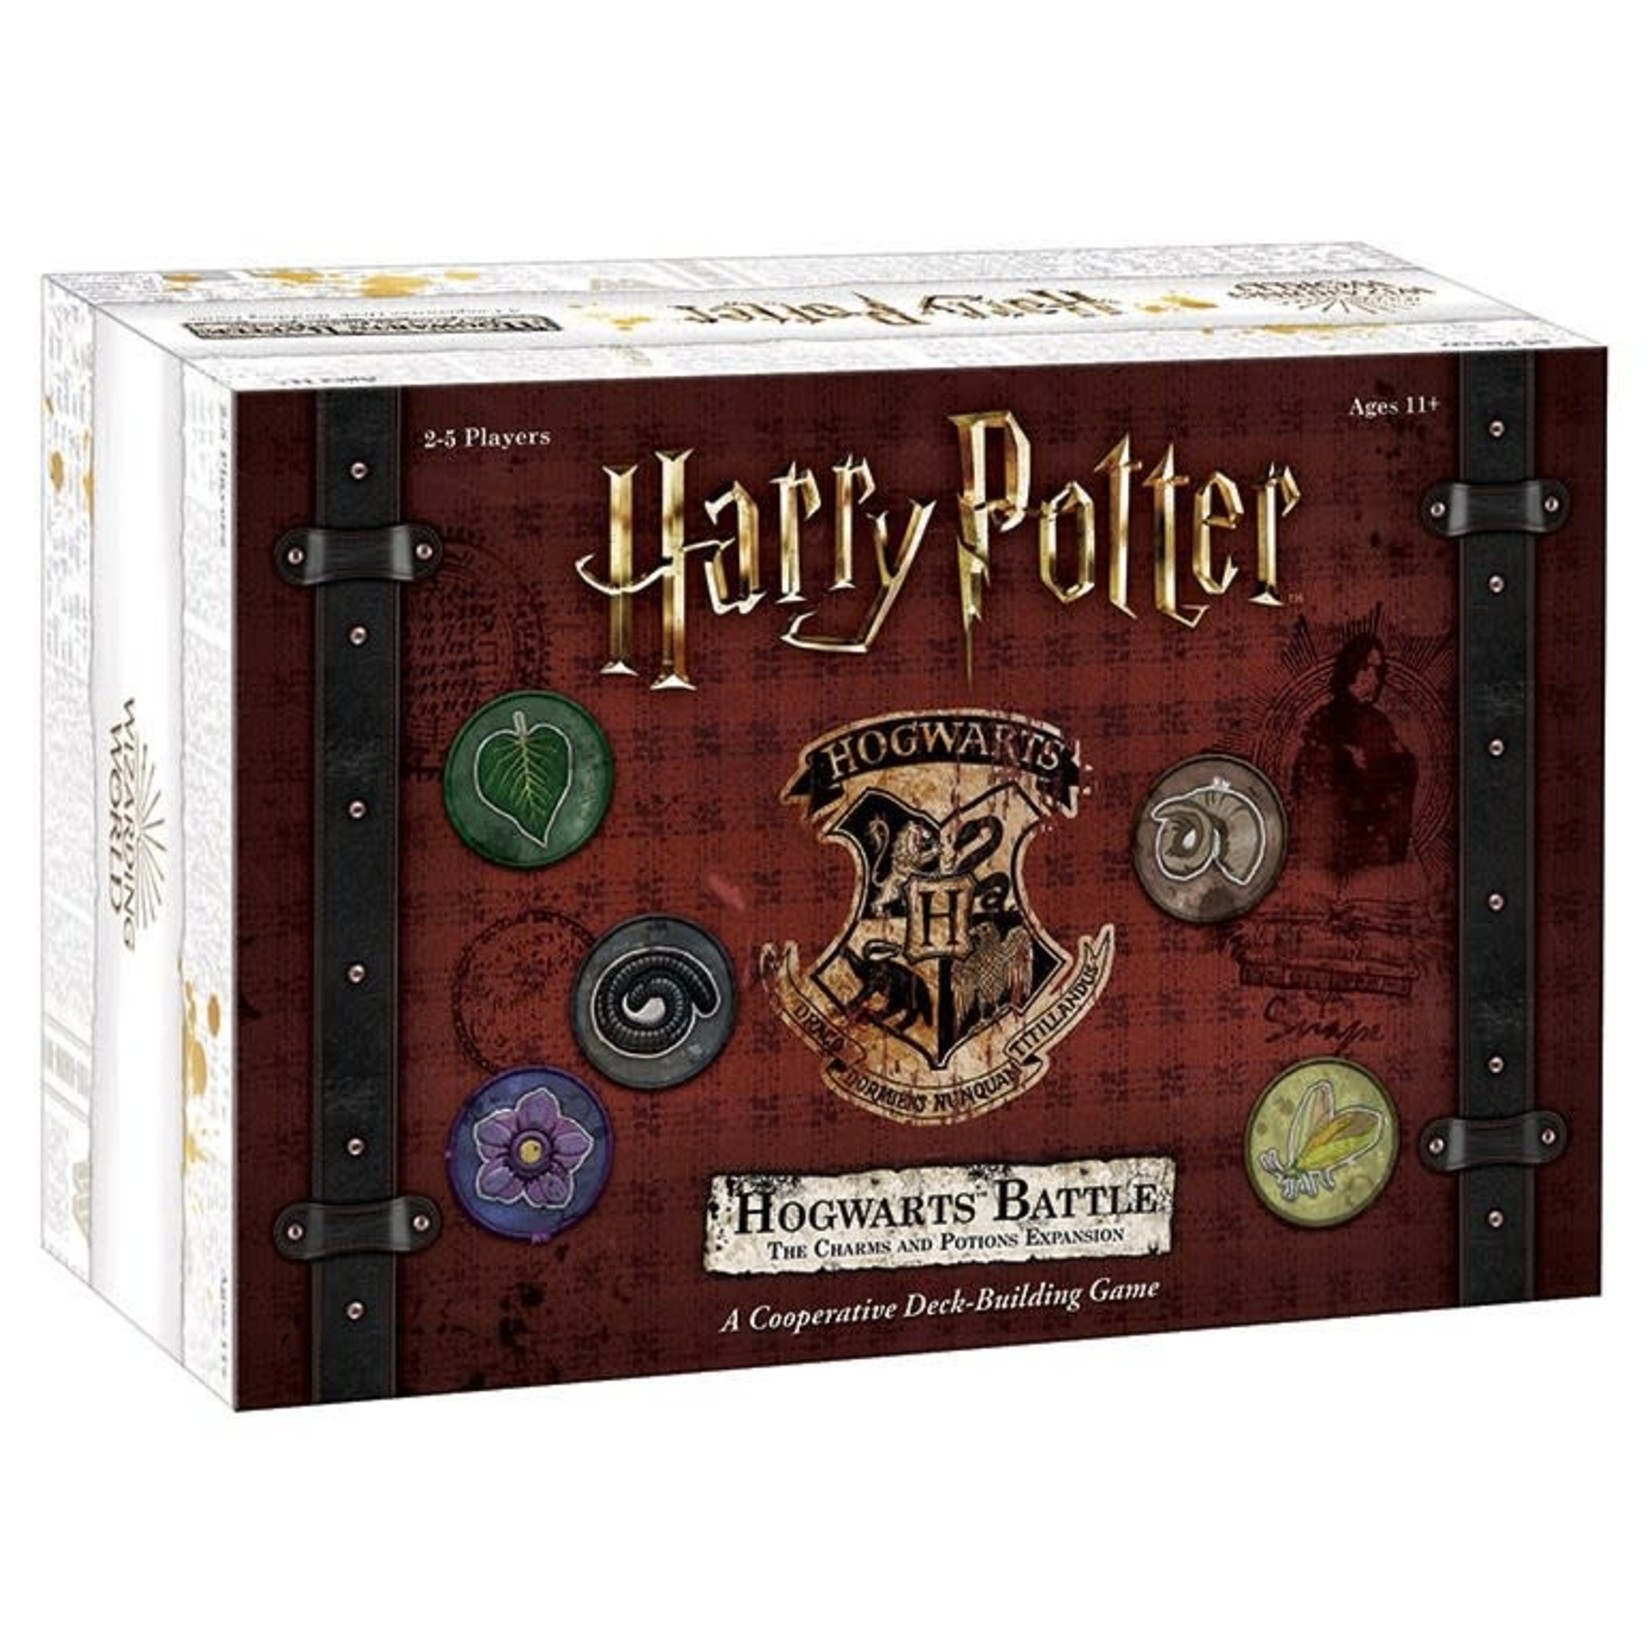 USAOPOLY Harry Potter Hogwarts Battle: Charms And Potions Expansion